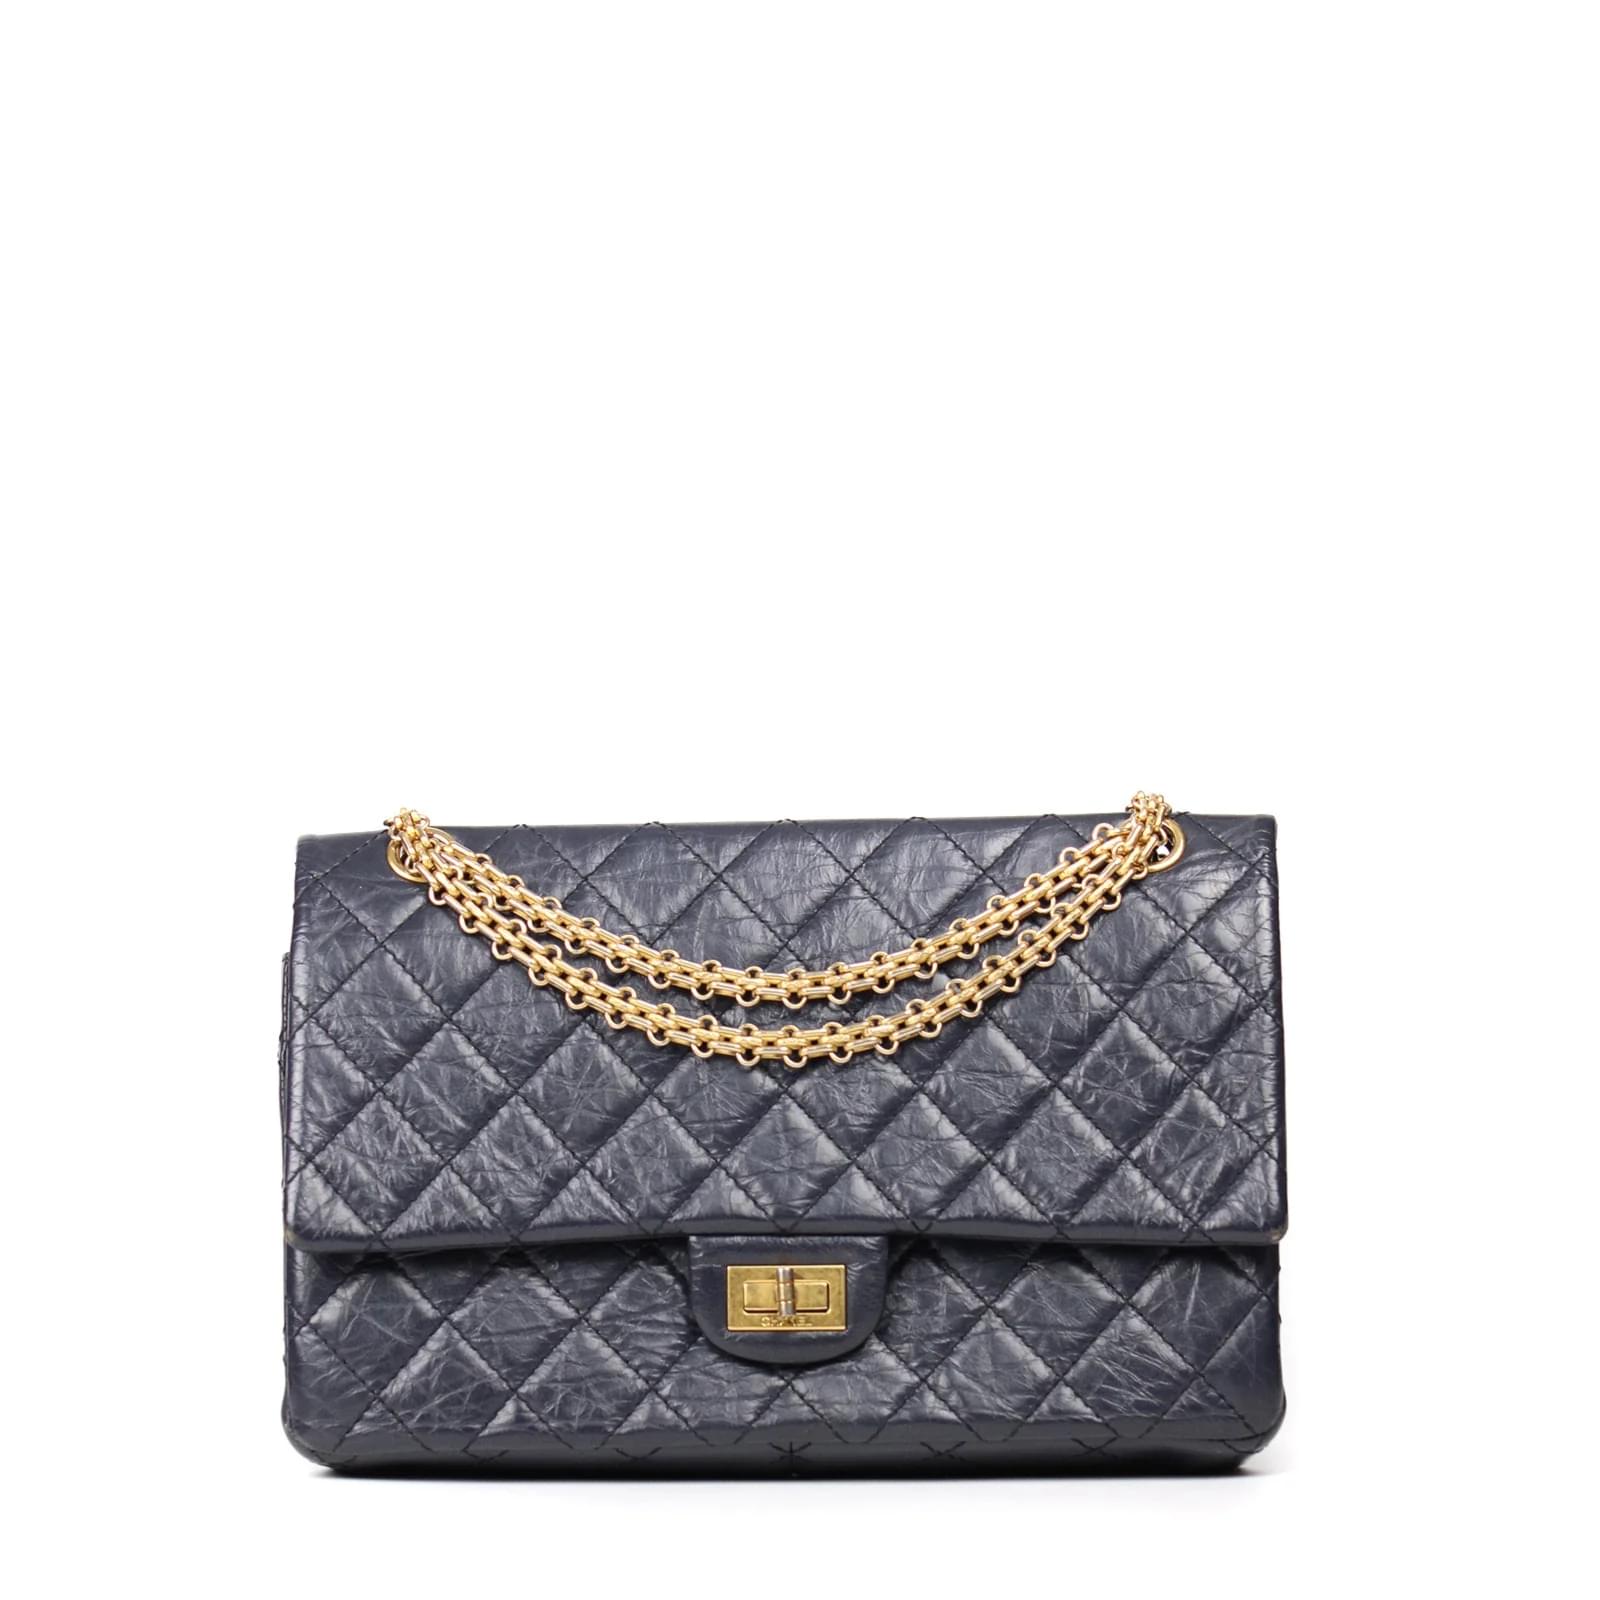 Chanel - 2.55 bag in midnight blue leather